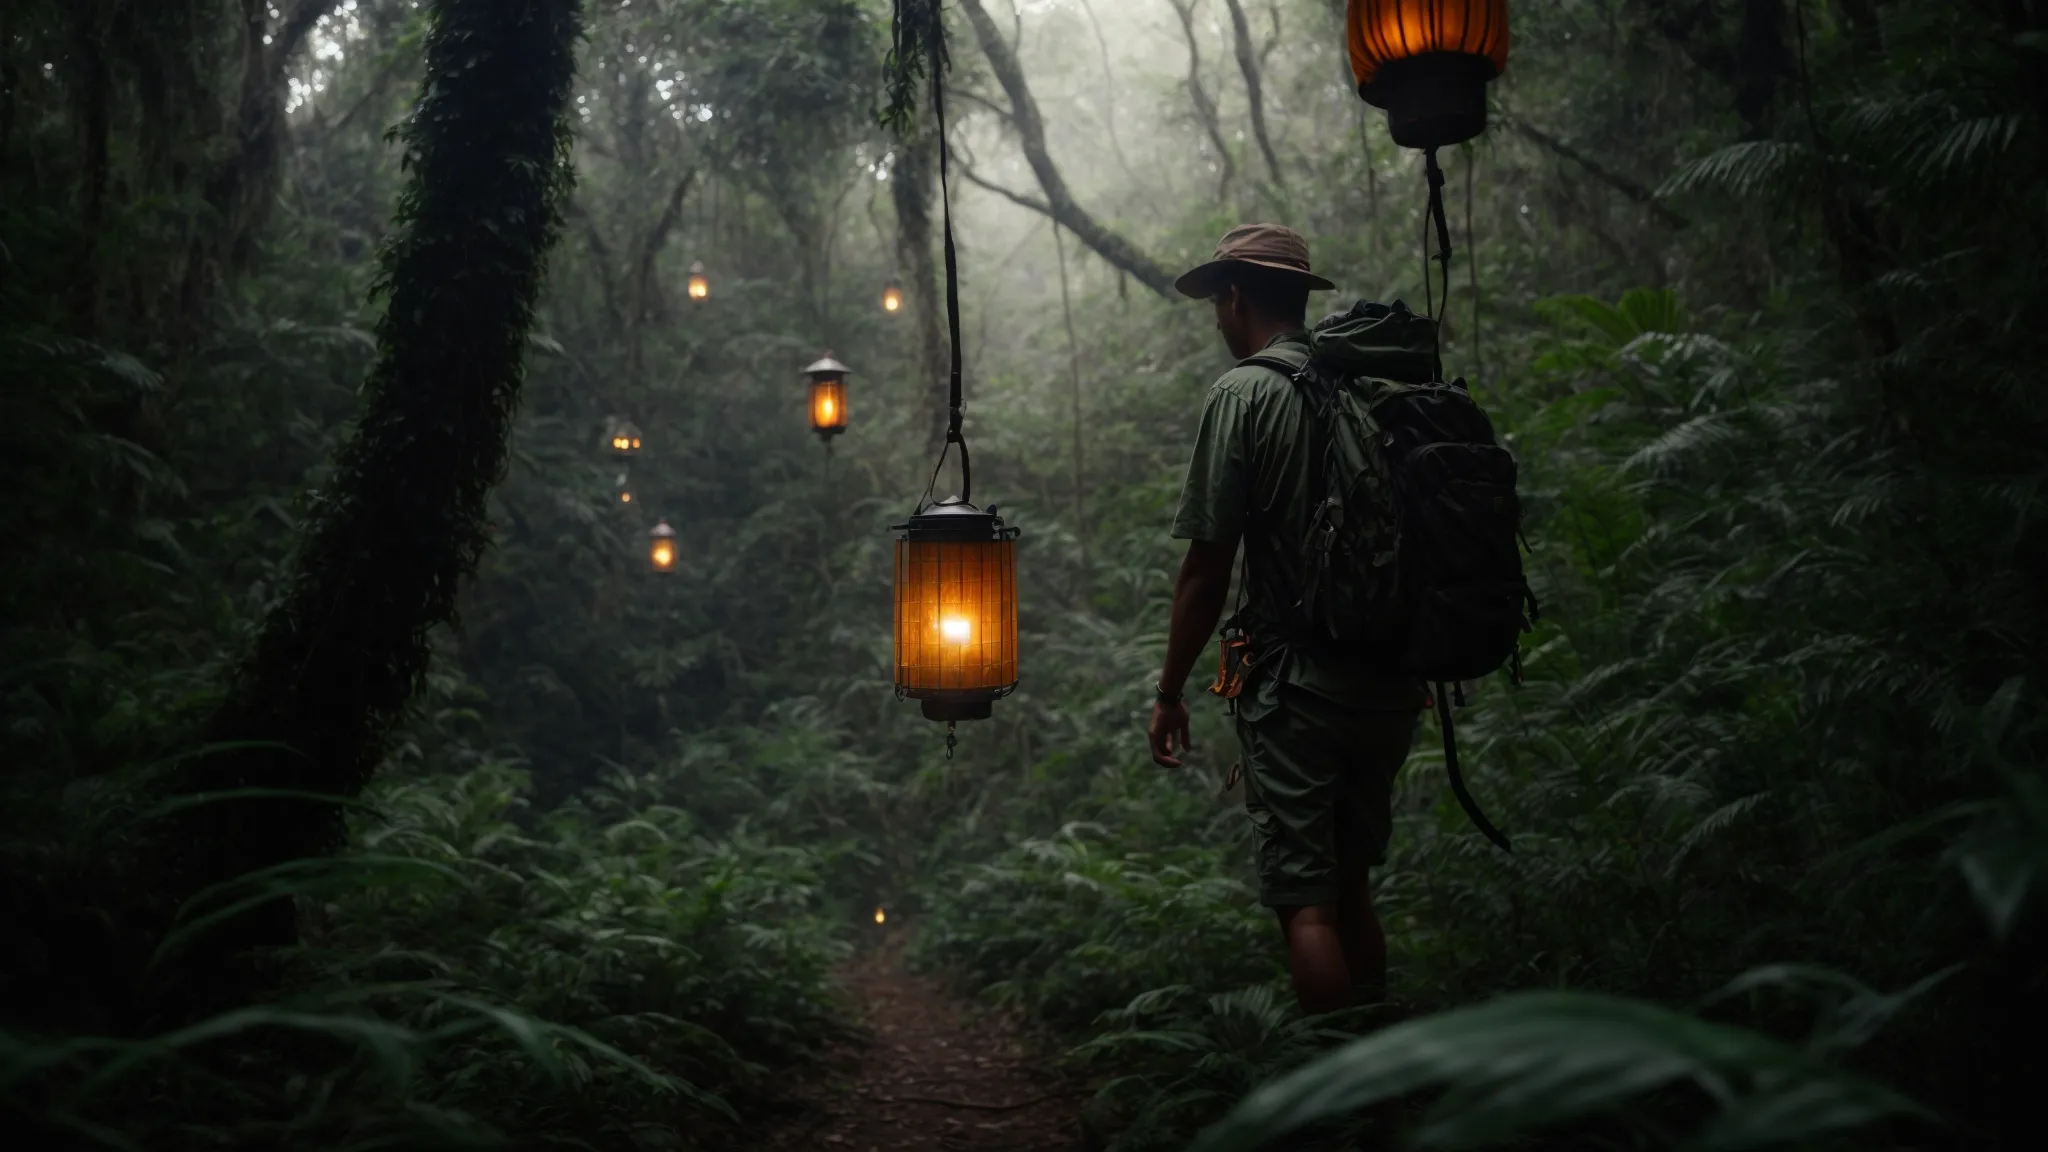 a hiker with a machete navigates a dense jungle, guided by lanterns hanging from the branches above.